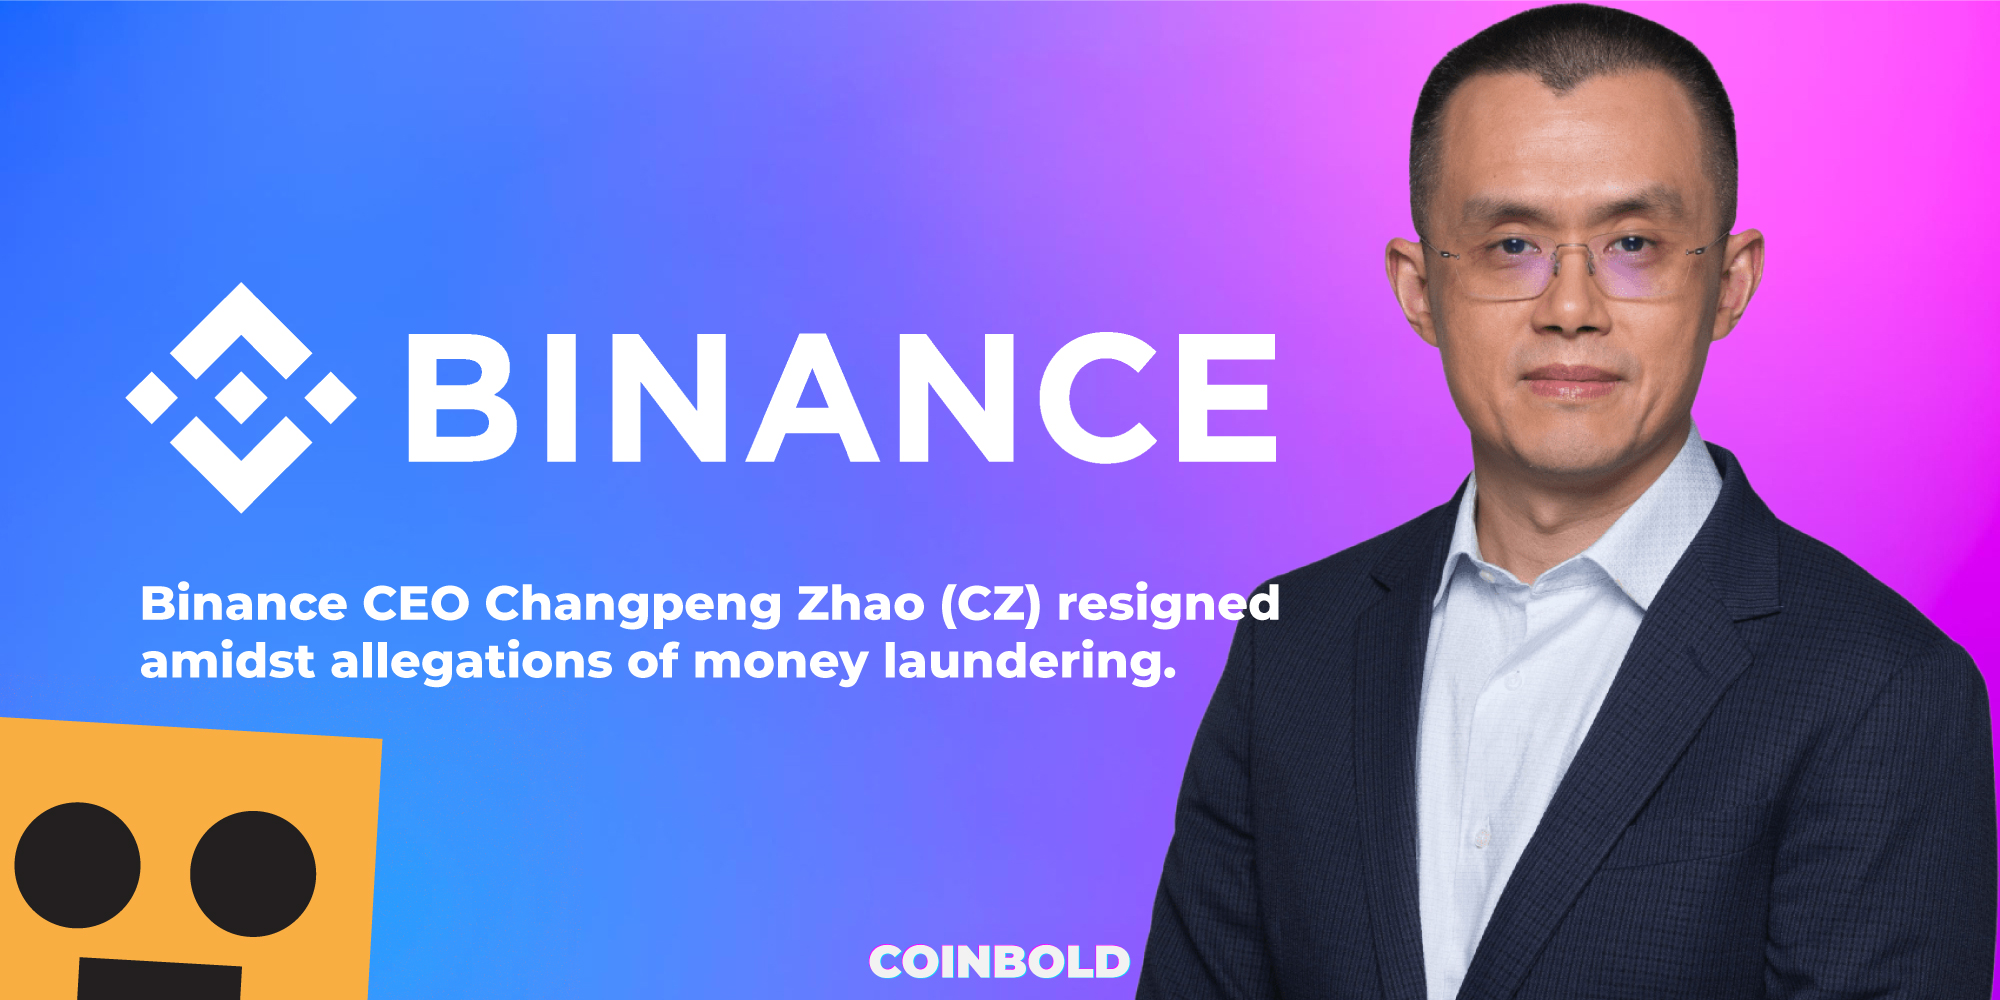 Binance CEO Changpeng Zhao (CZ) resigned amidst allegations of money laundering.